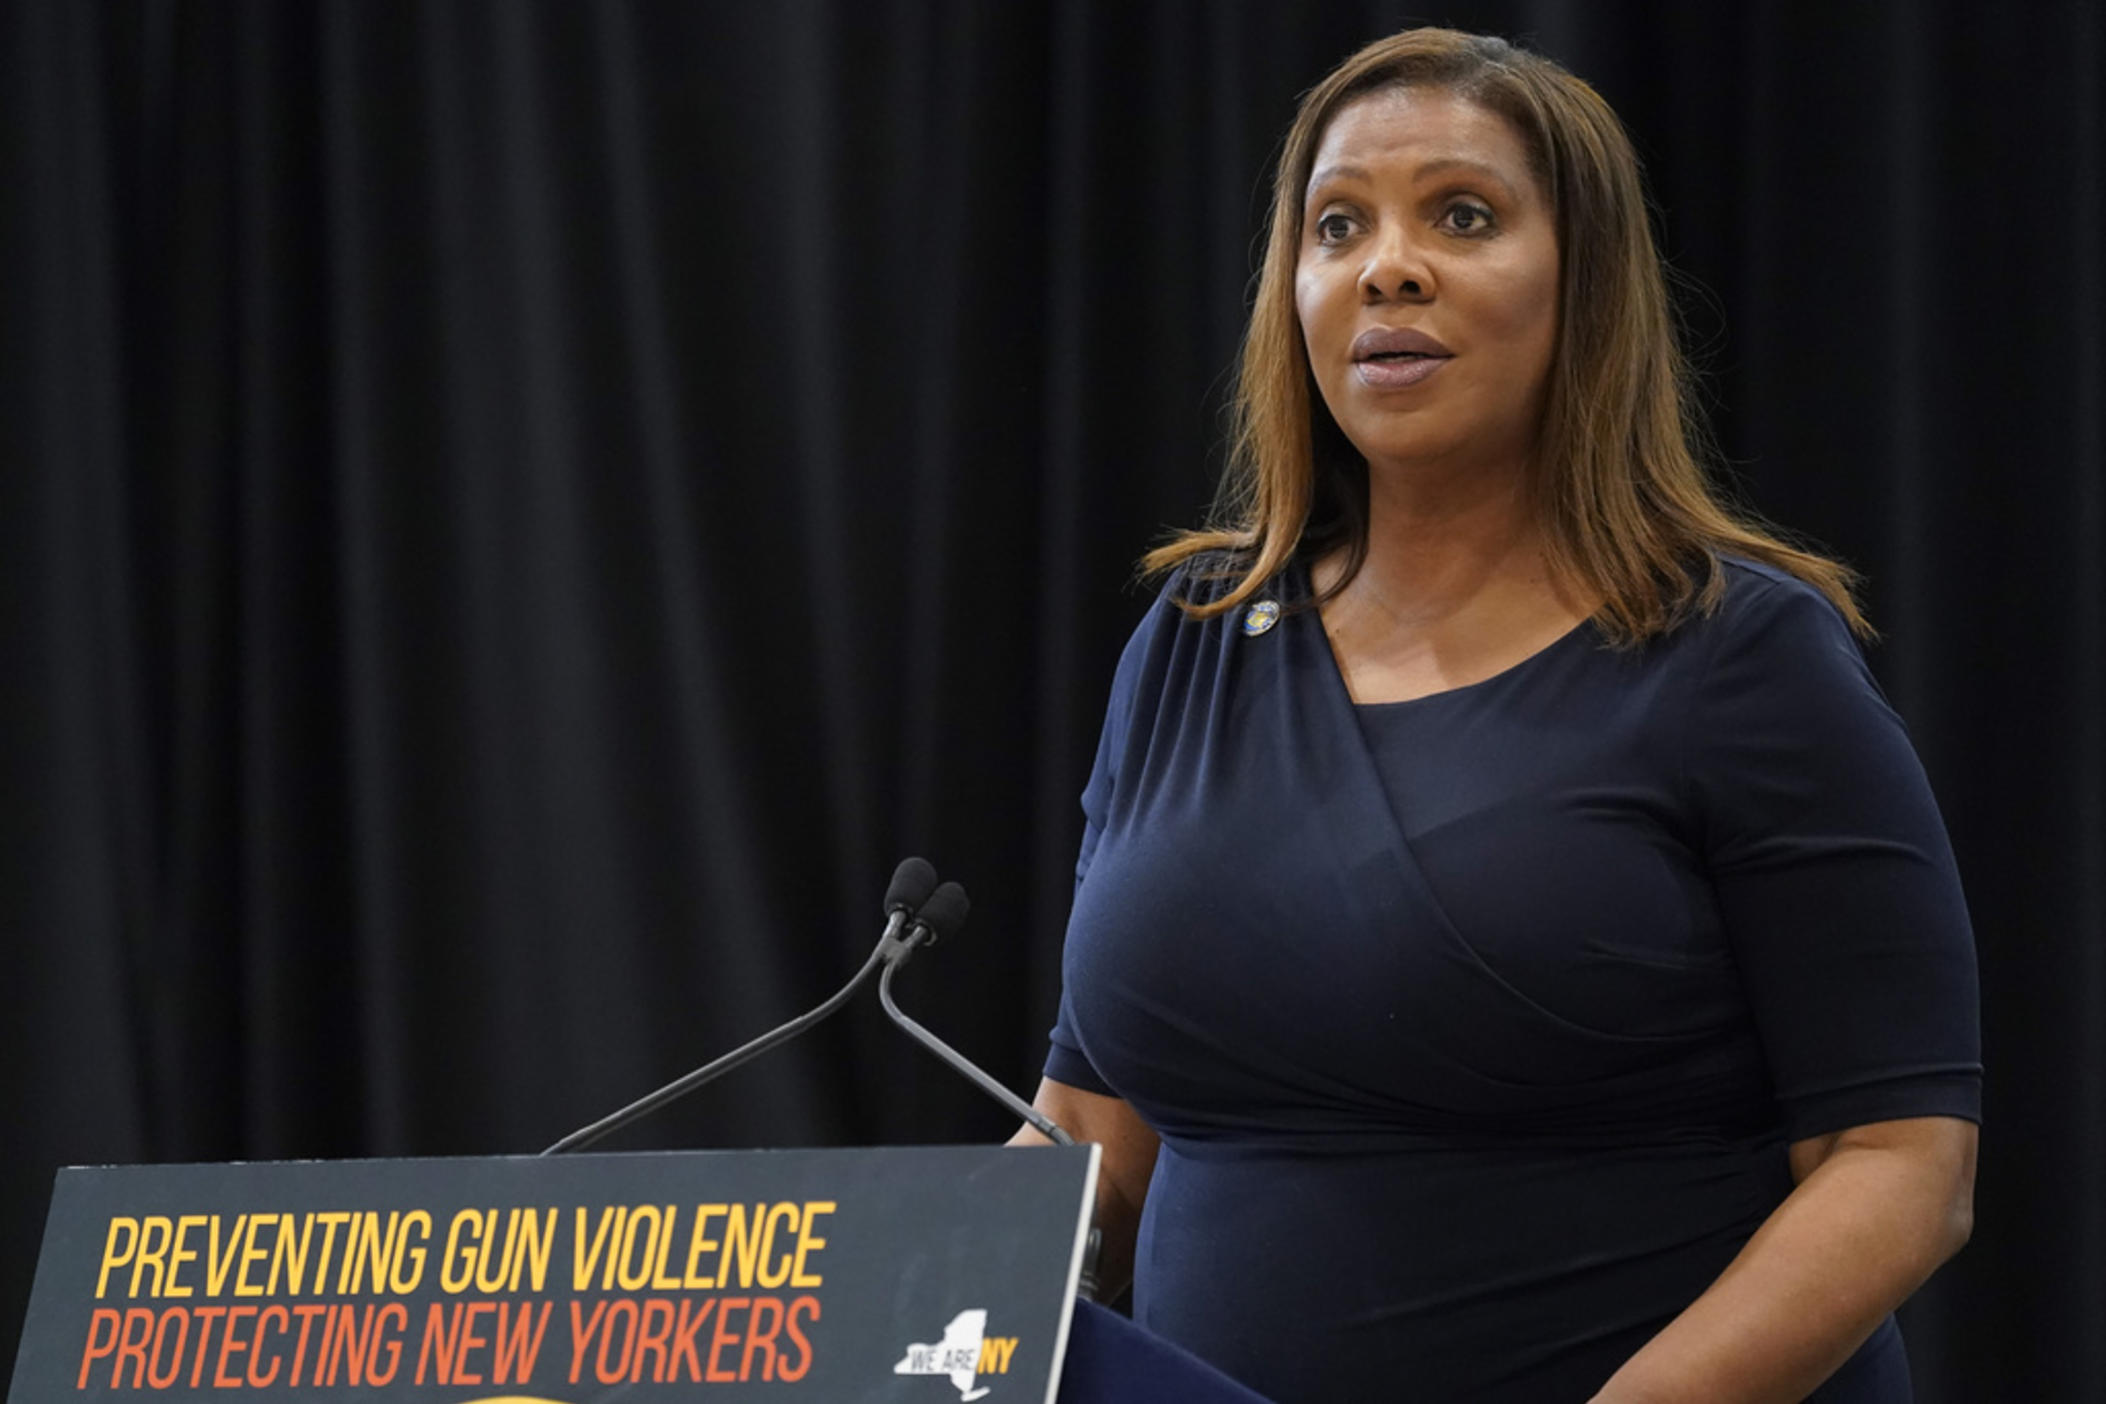 New York Attorney General Letitia James speaks during a ceremony where Gov. Kathy Hochul signed a package of bills to strengthen gun laws, June 6, 2022, in New York. James filed a lawsuit Thursday, May 11, 2023 against a gun accessory manufacturer for selling an easily removable magazine lock that can convert a legal weapon into an illegal assault weapon capable of holding high-capacity magazines. 